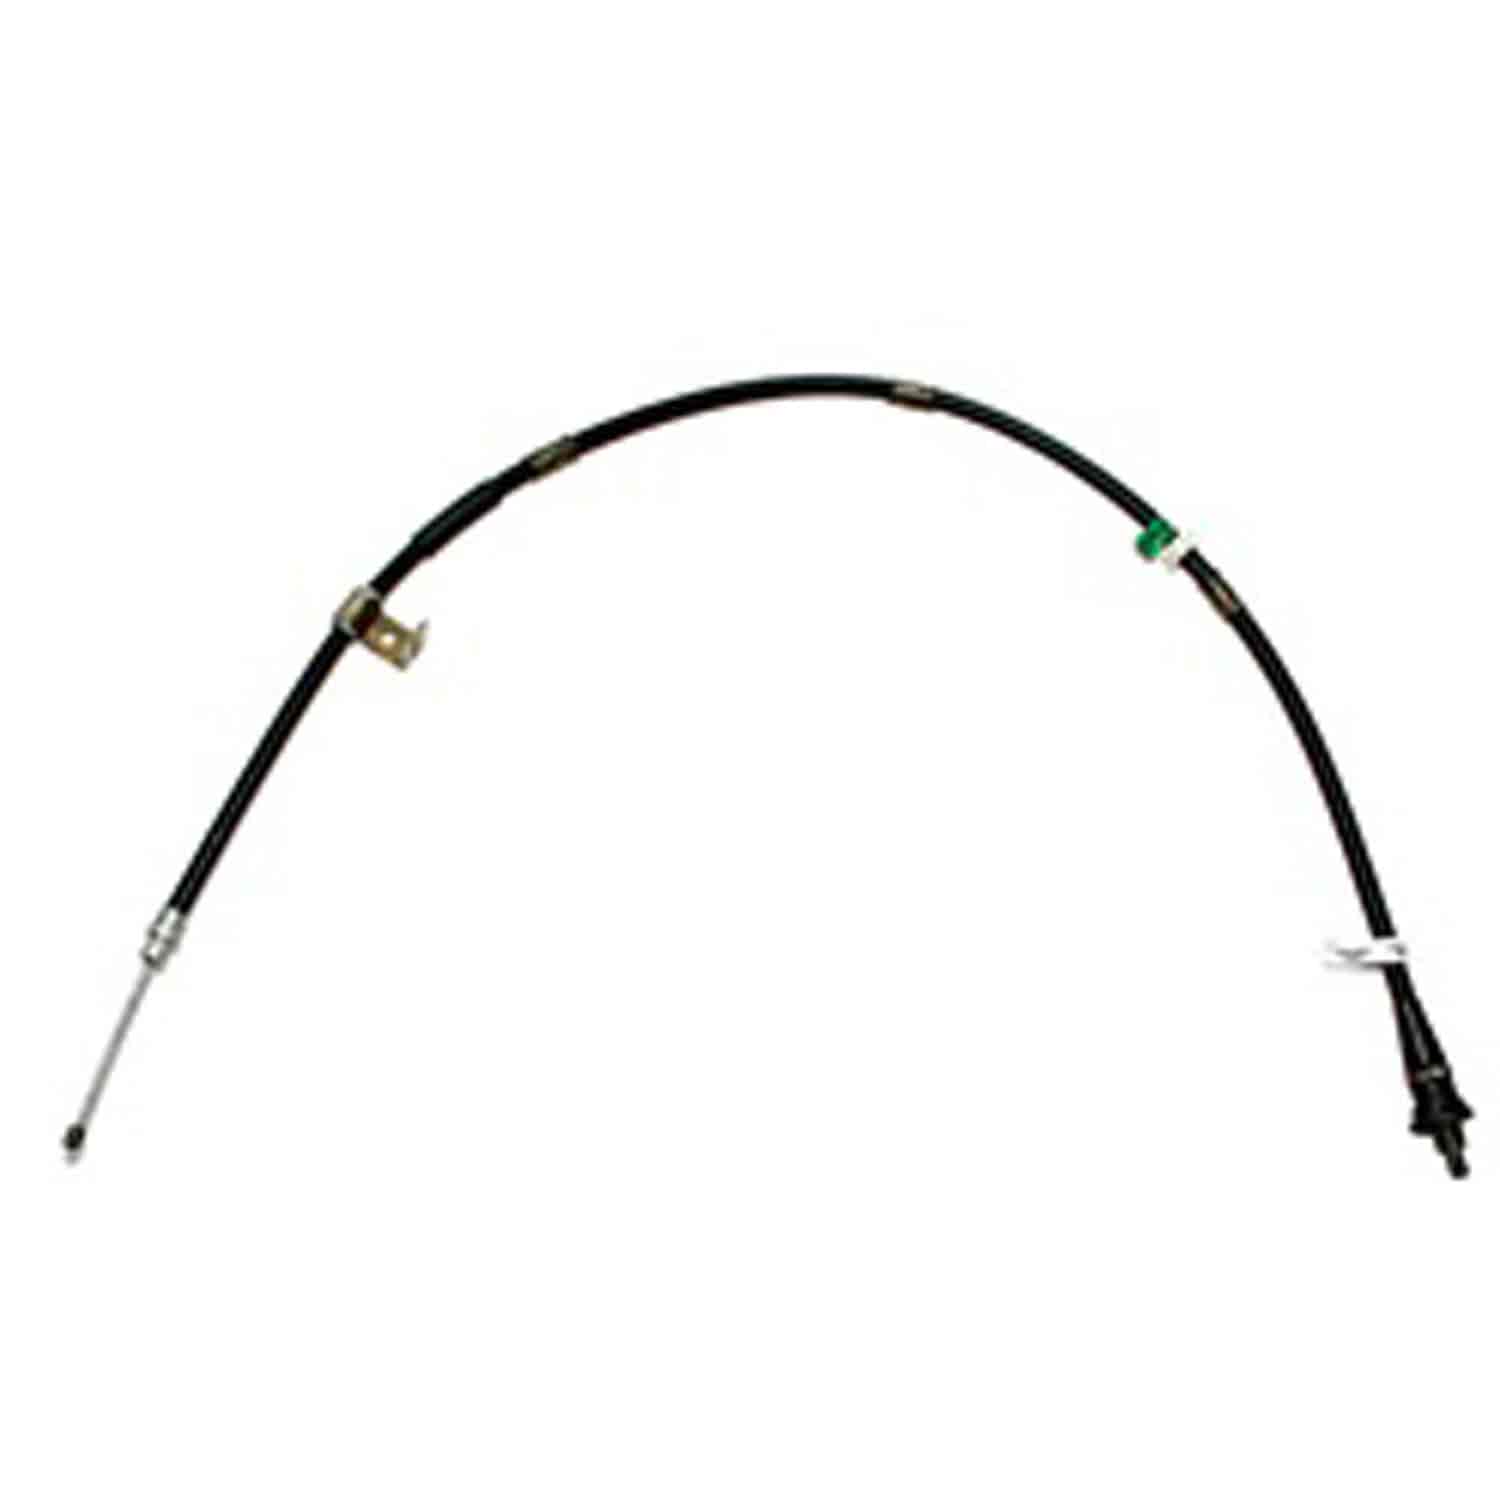 Emergency Brake Cable Rear Right 1999-2001 Grand Cherokee